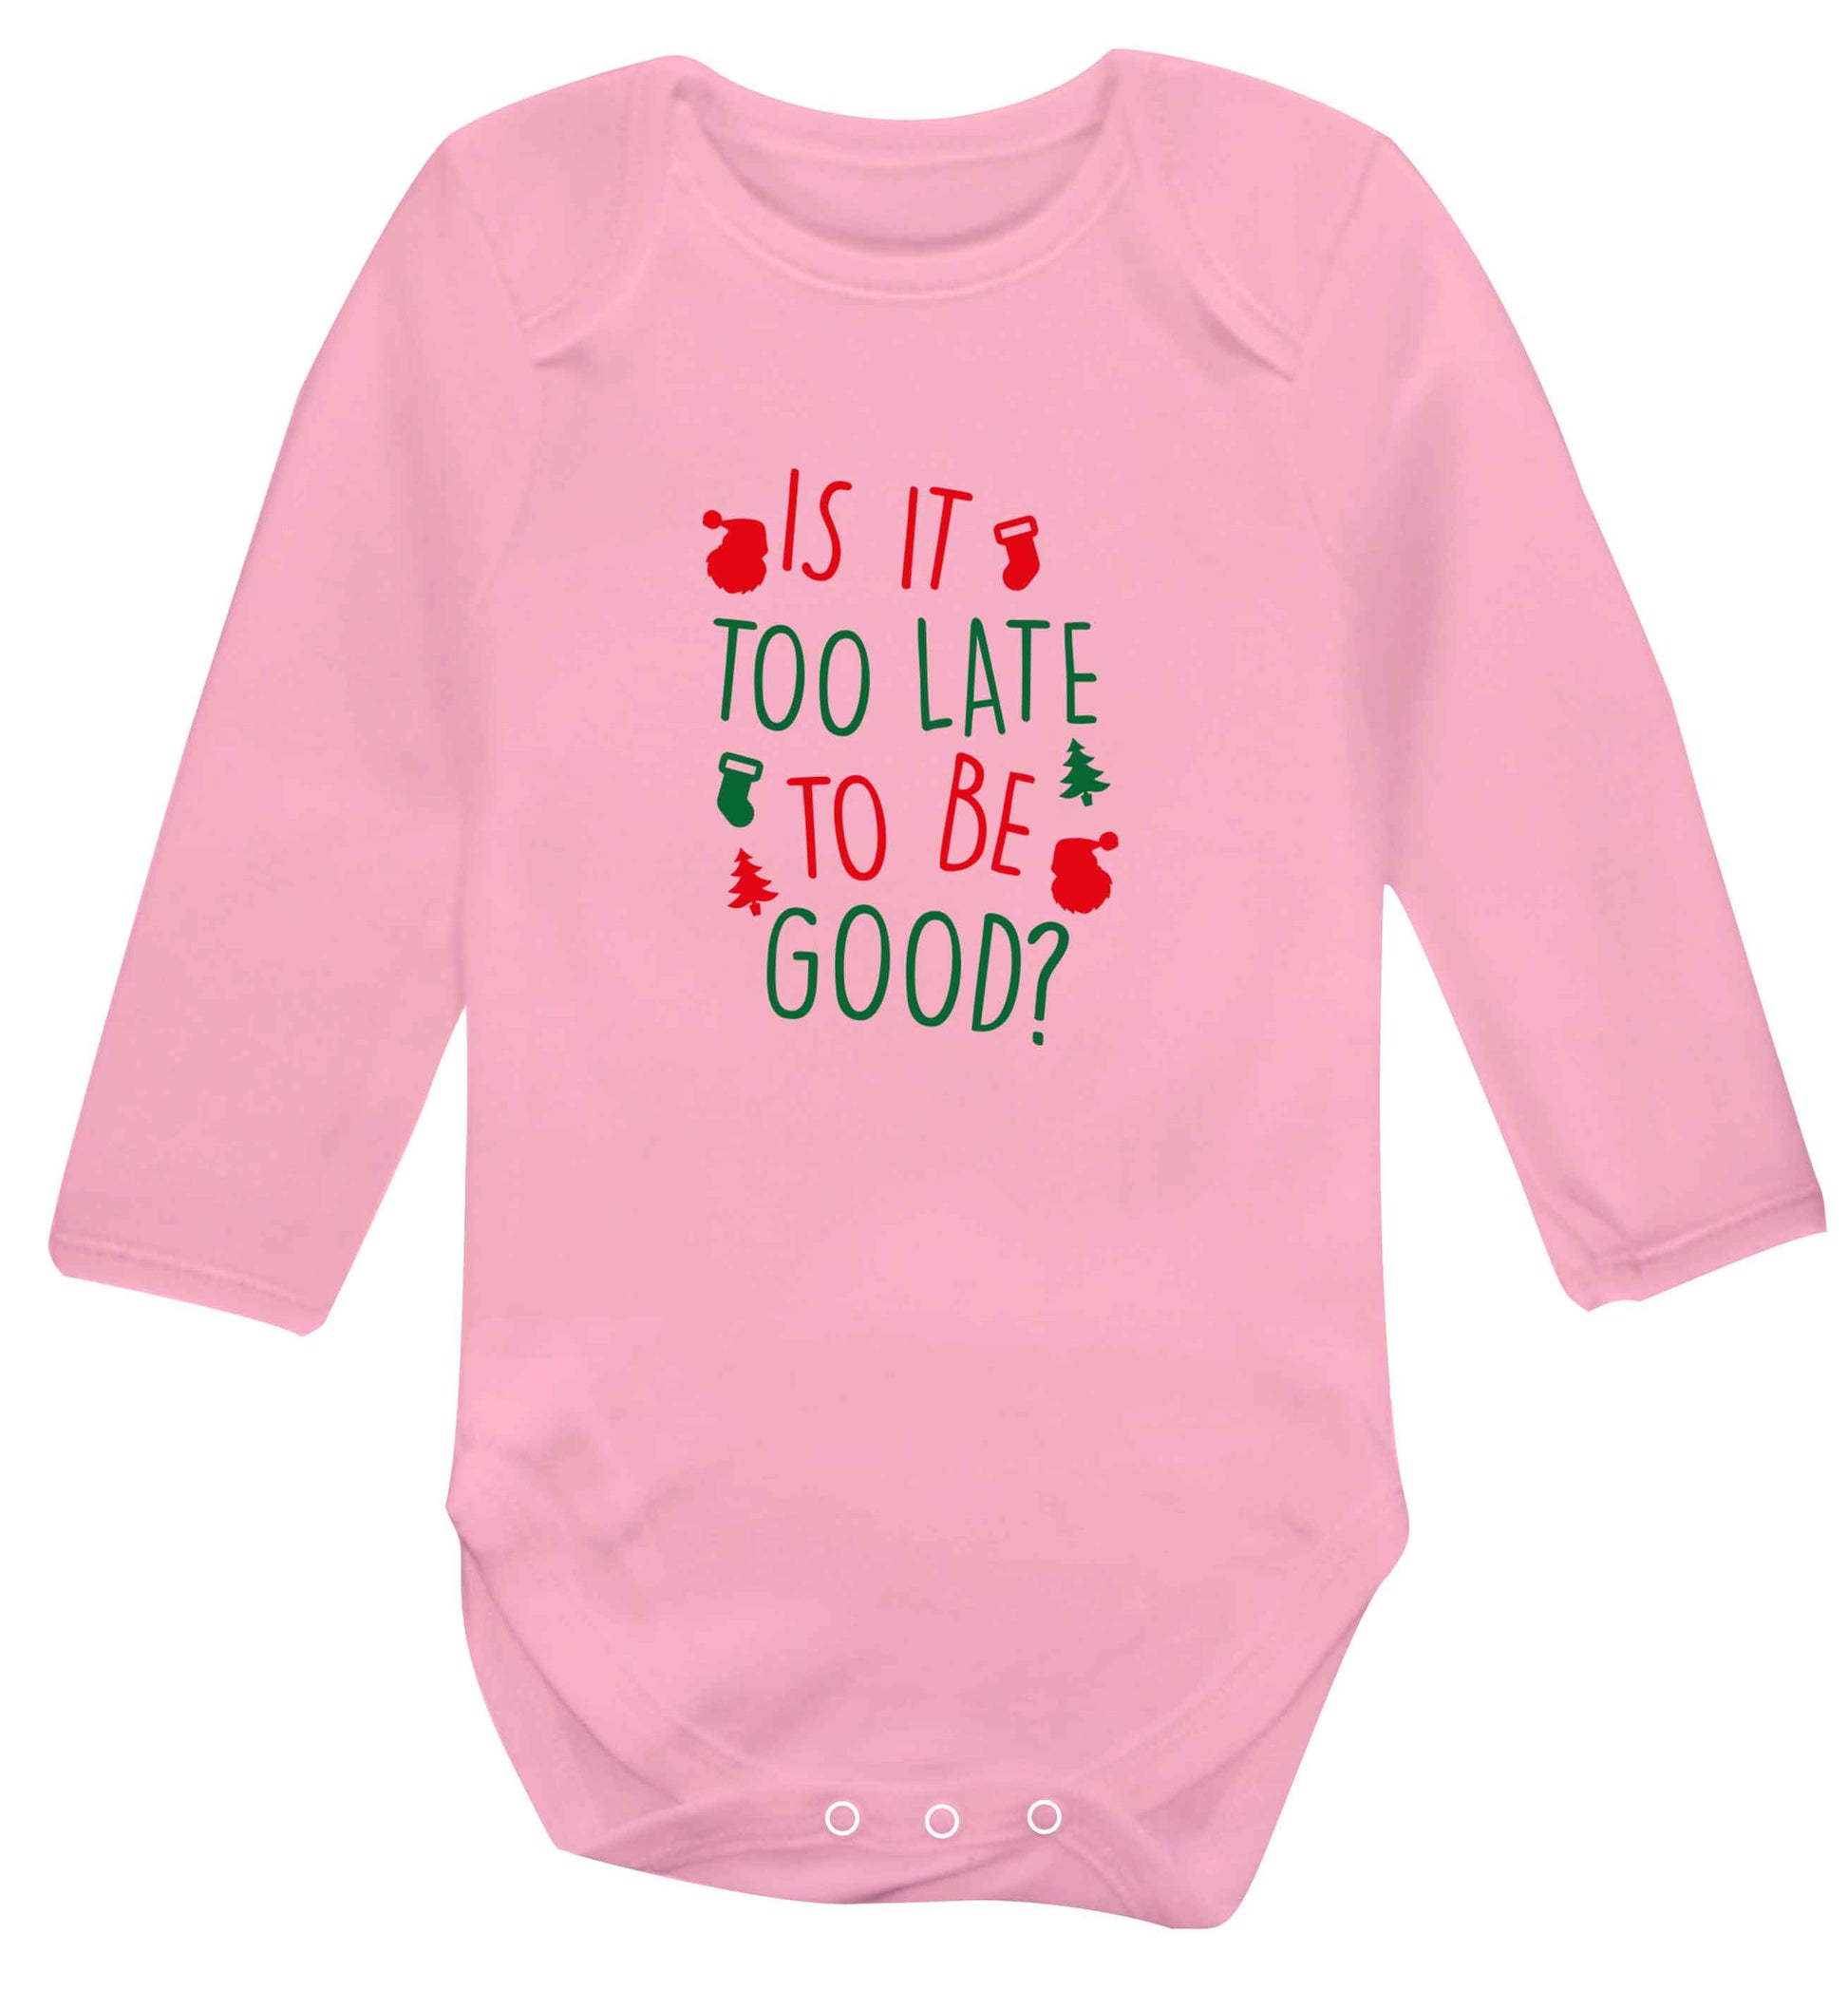 Too Late to be Good baby vest long sleeved pale pink 6-12 months